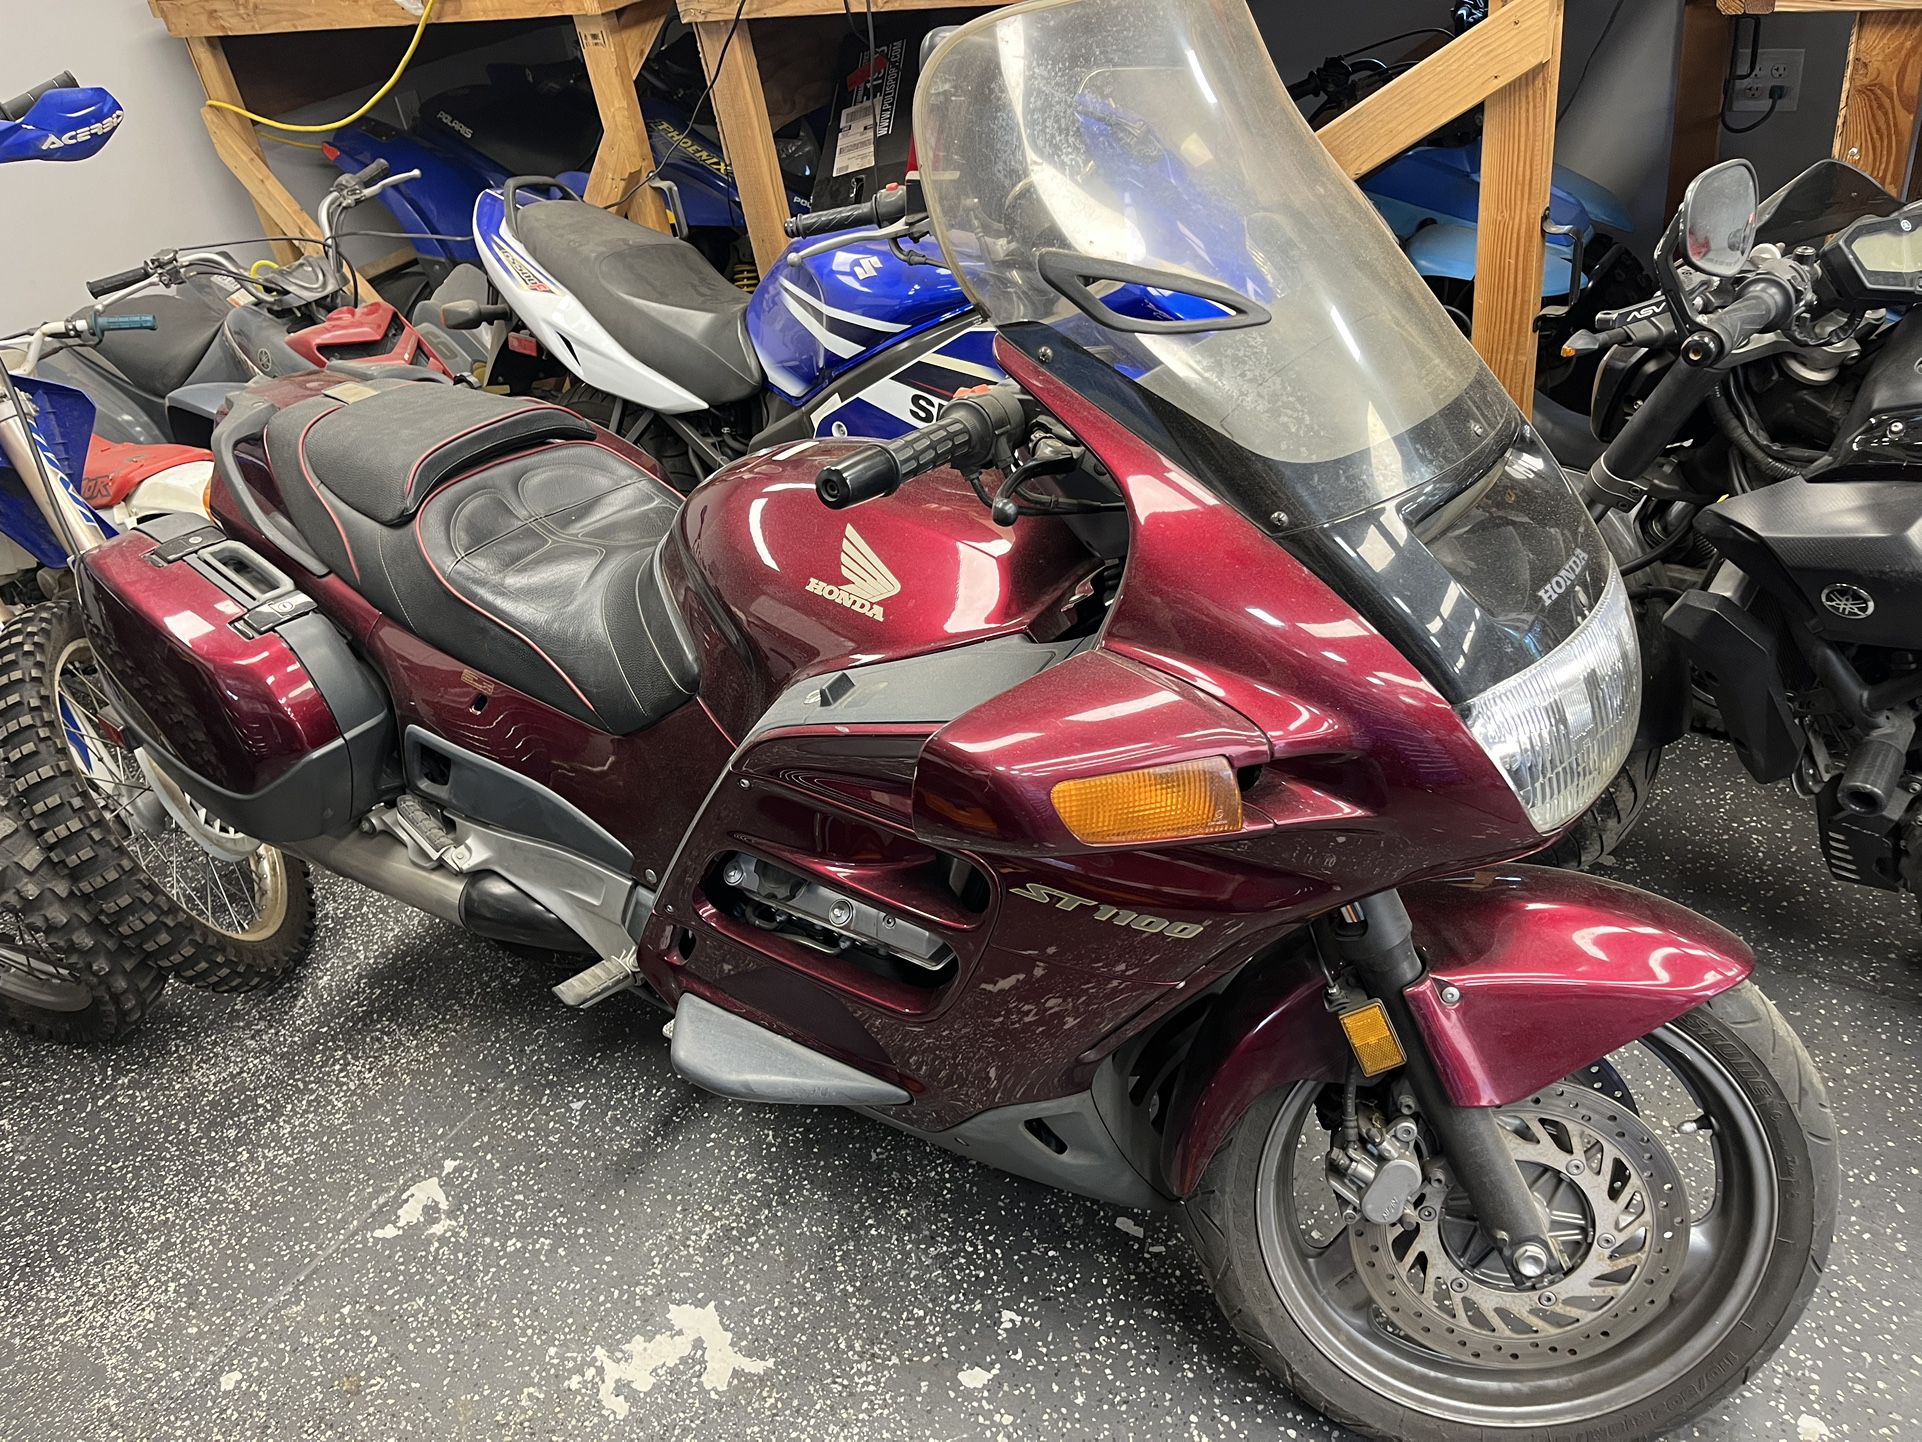 2002 Honda XT 1100 Great Bike With Very Low Miles